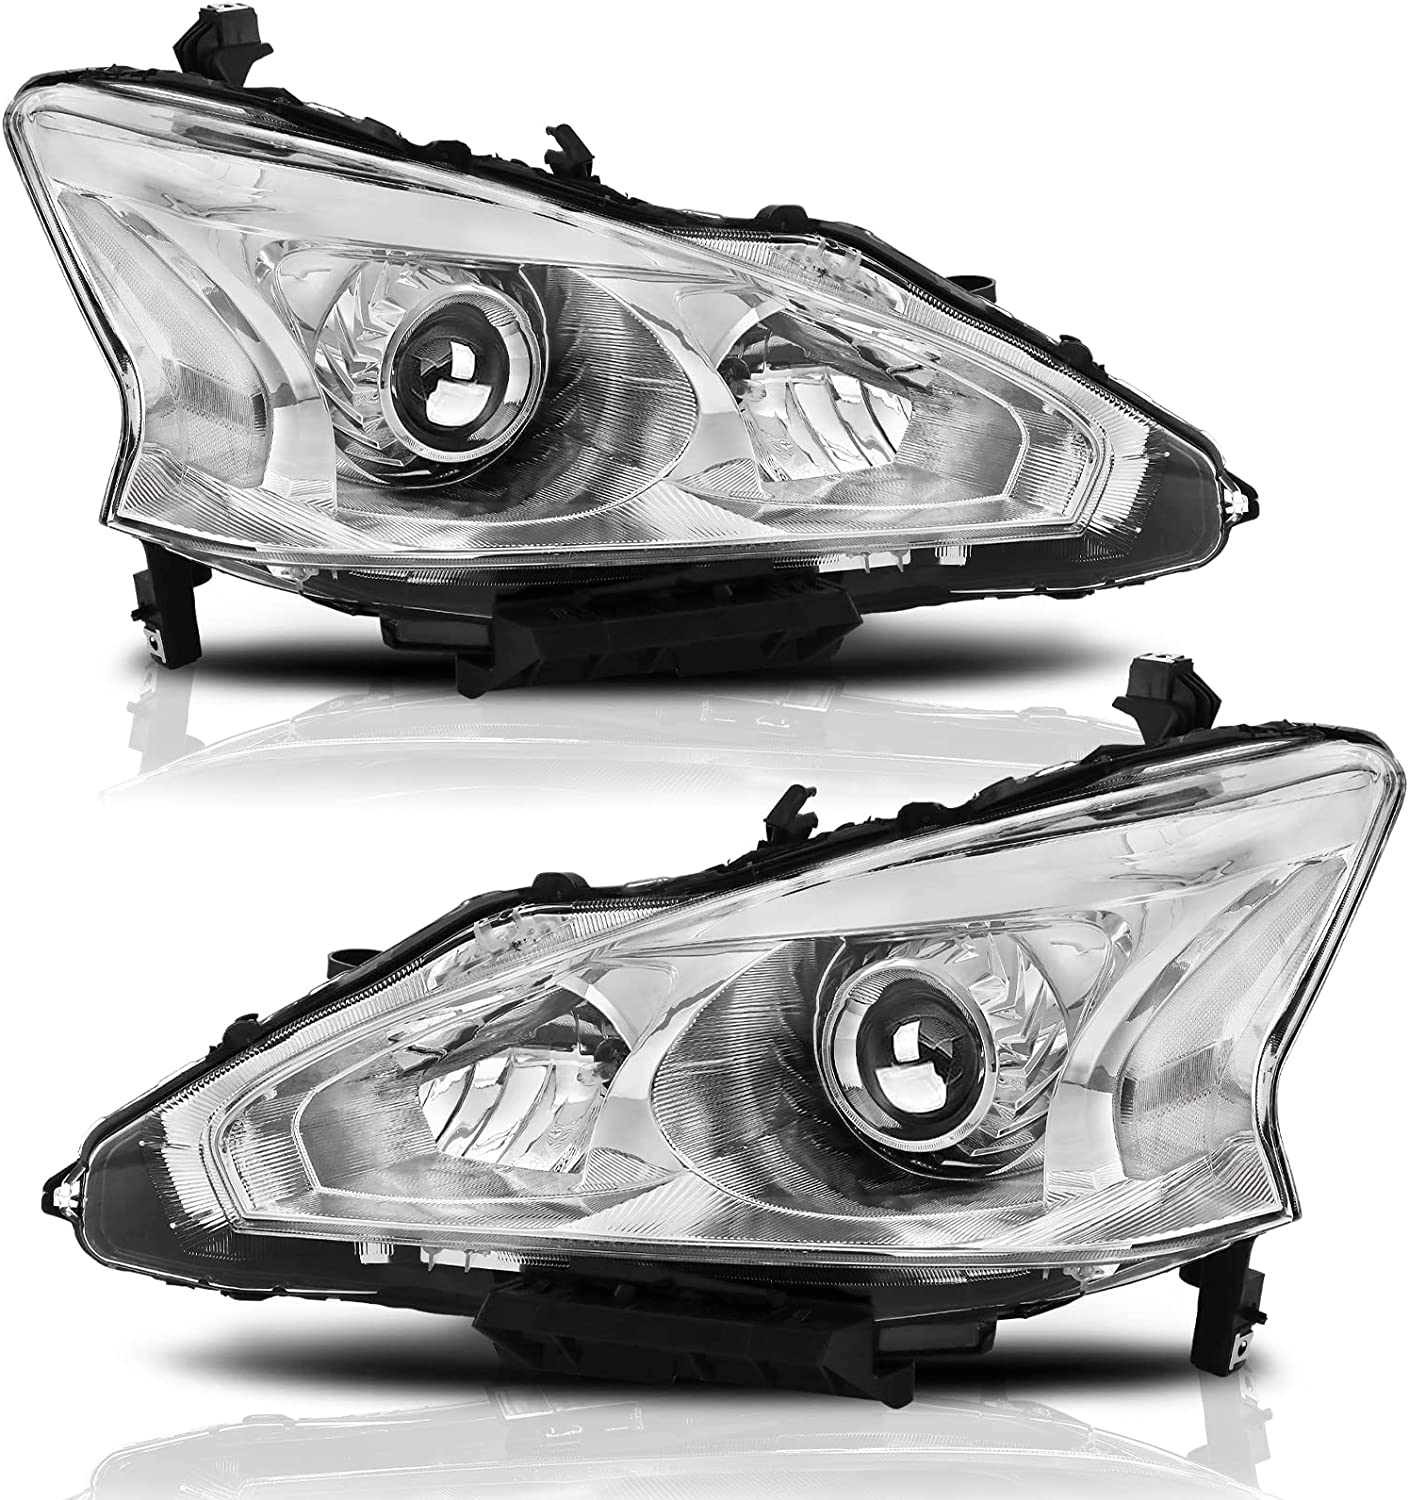 ALZIRIA Headlight Assembly Compatible with 2013-2015 Nissan Altima S/SL/SV, Only Fit 4-Door (Chrome Housing Amber Reflector)